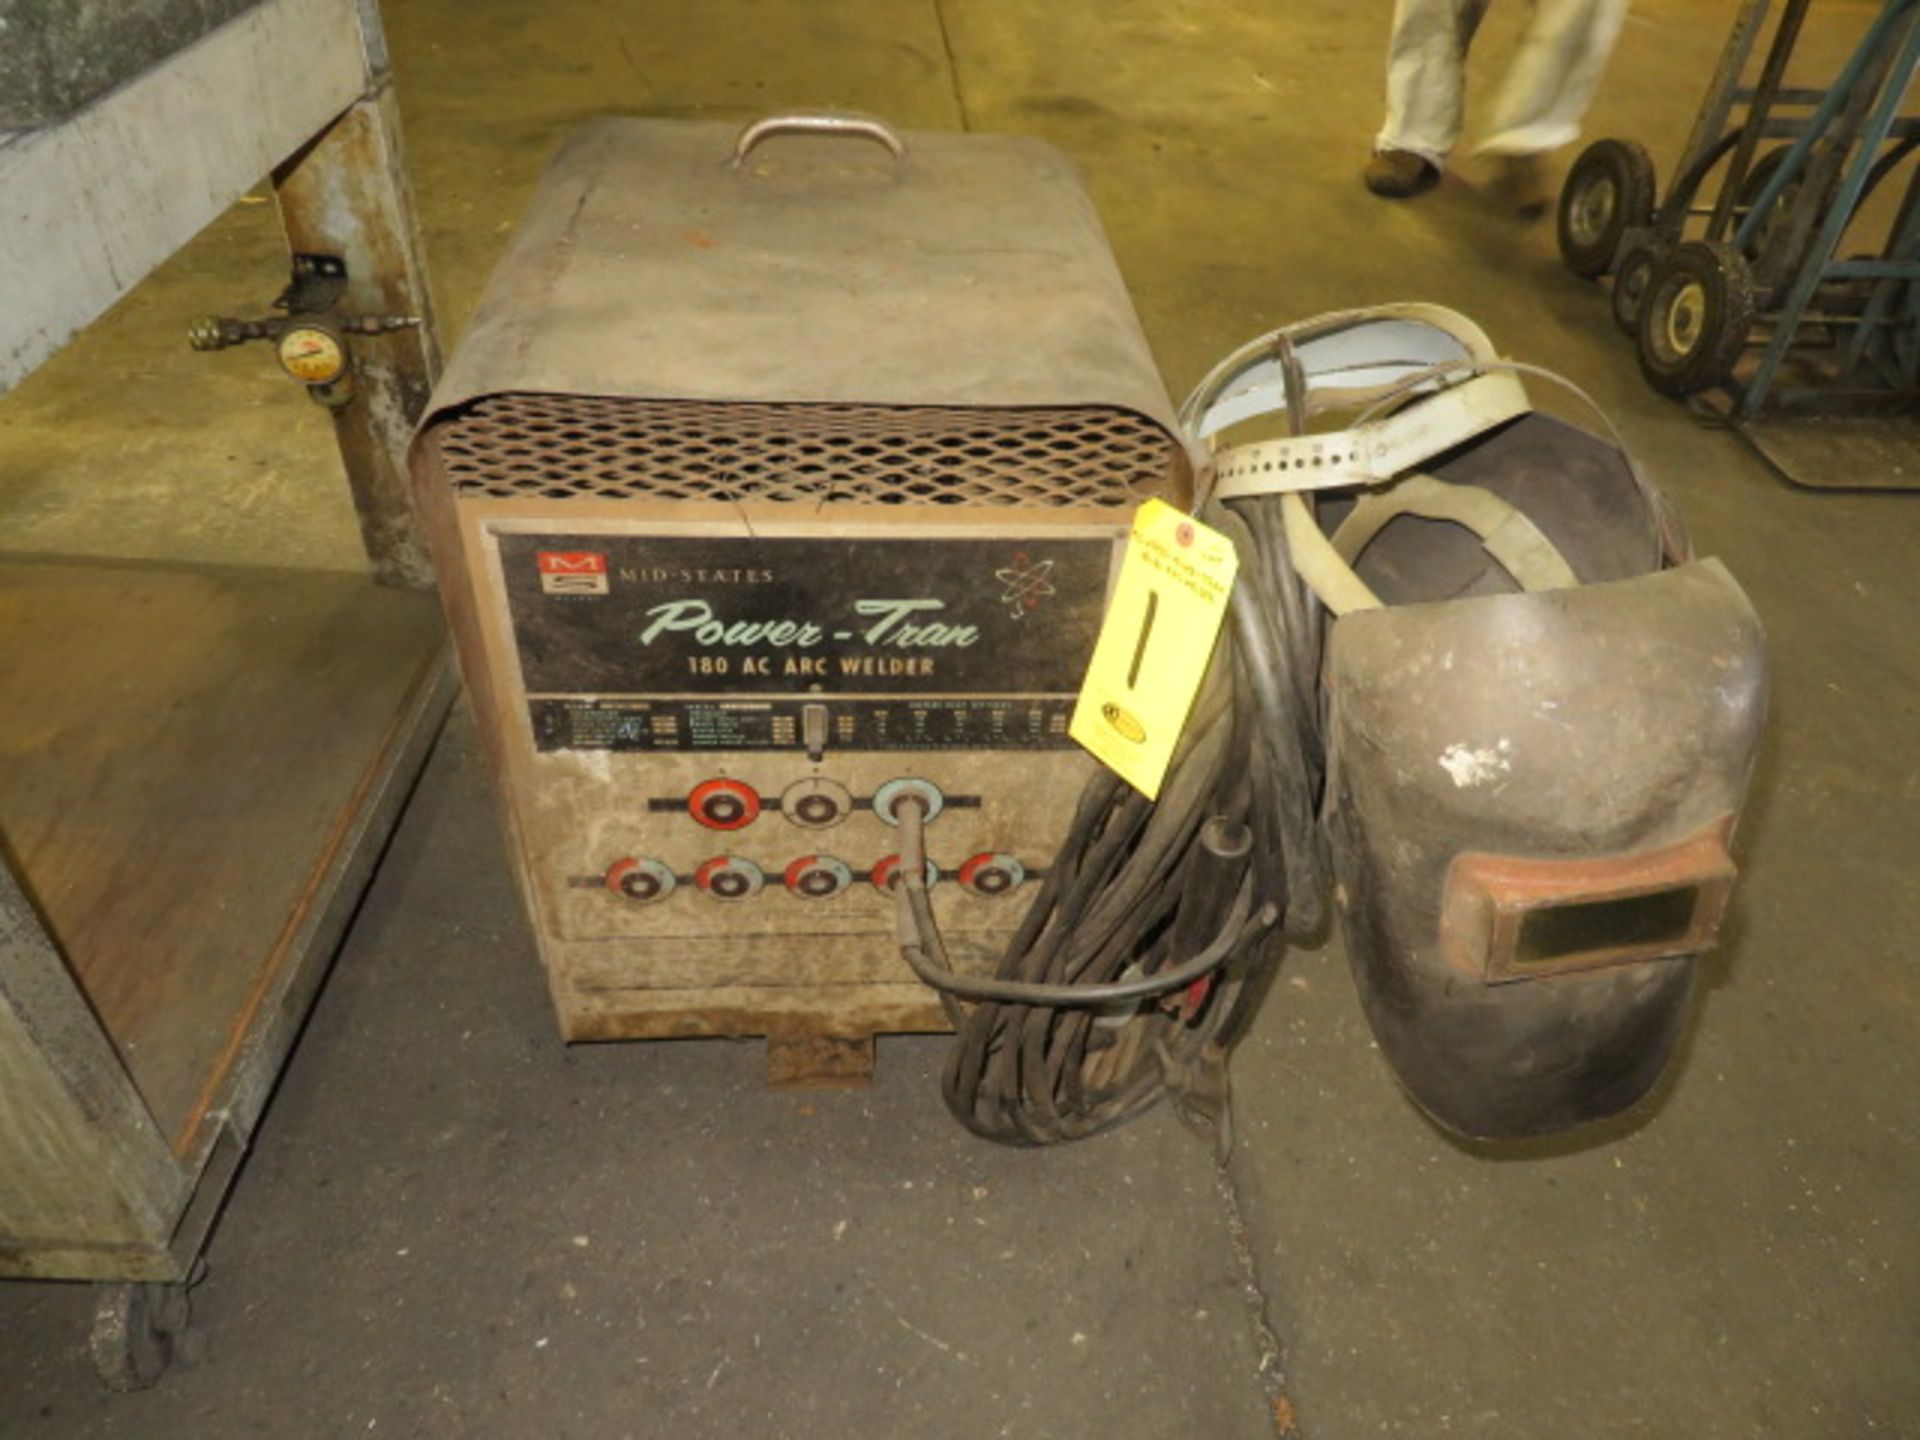 MID-STATES POWER-TRAN 180AMP STICK WELDER W/LEAD AND MASK